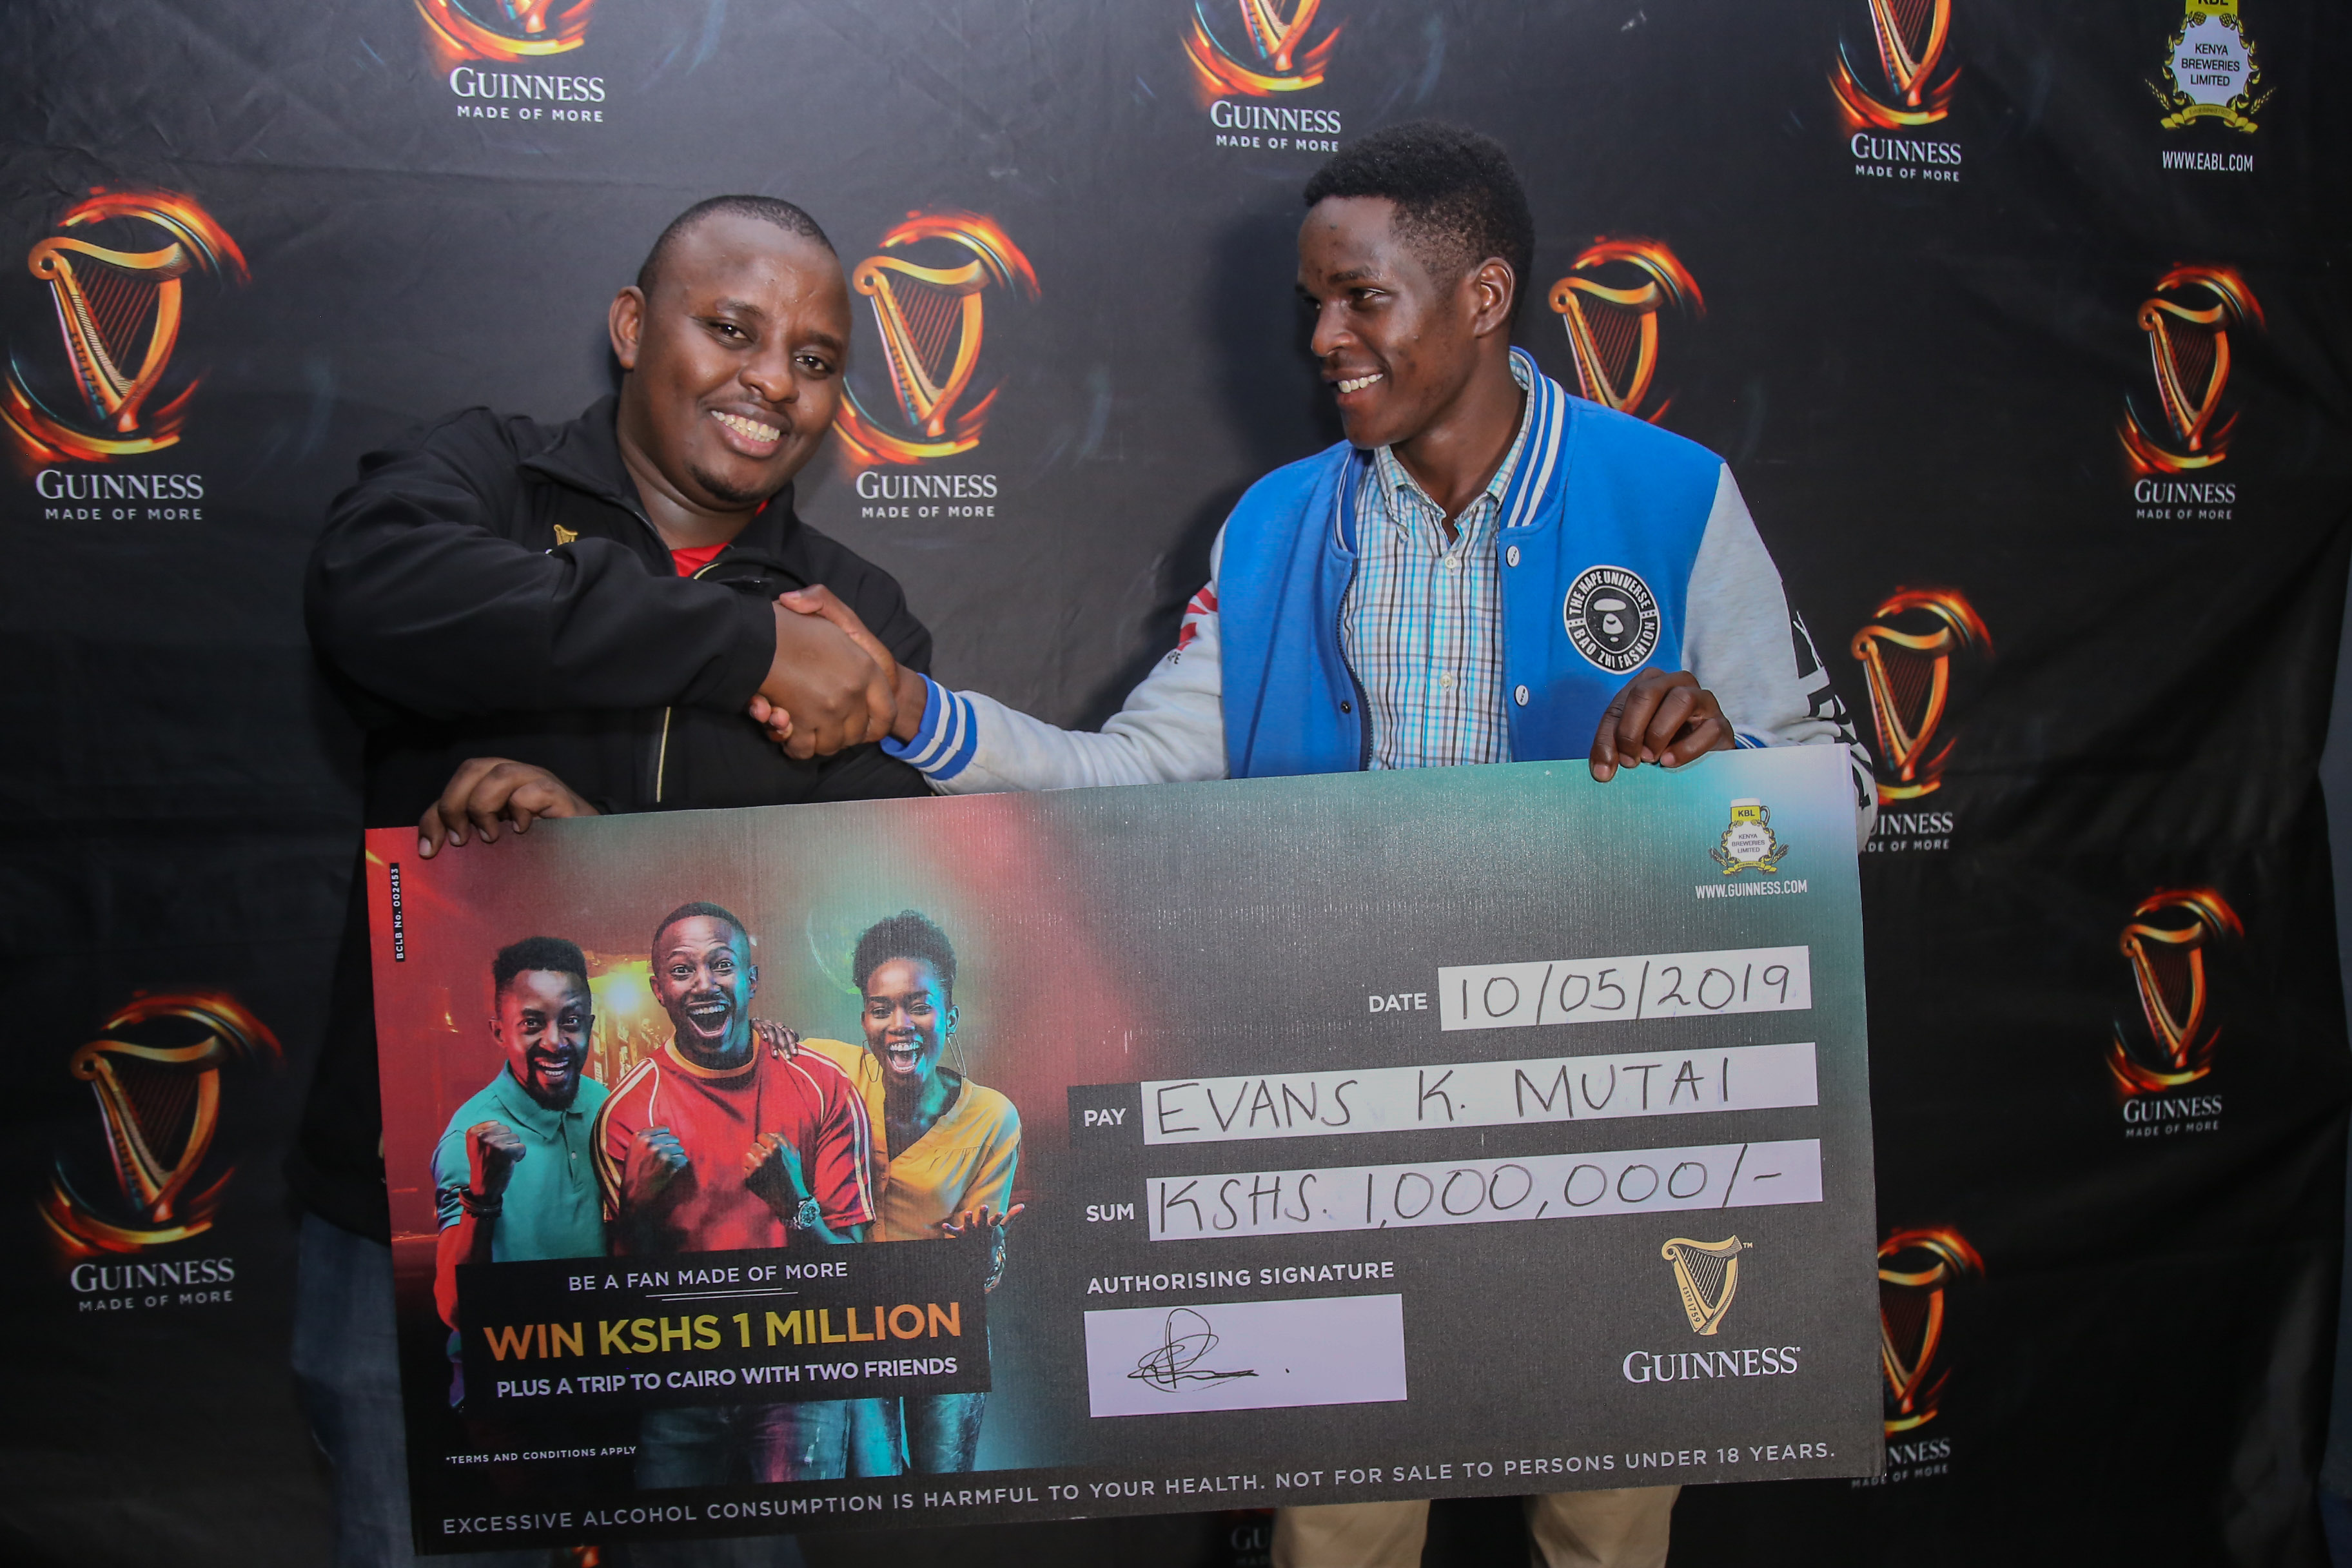 22-Year Old Wins Kshs One Million Guinness Grand Prize And The Trip to Cairo With Two Friends